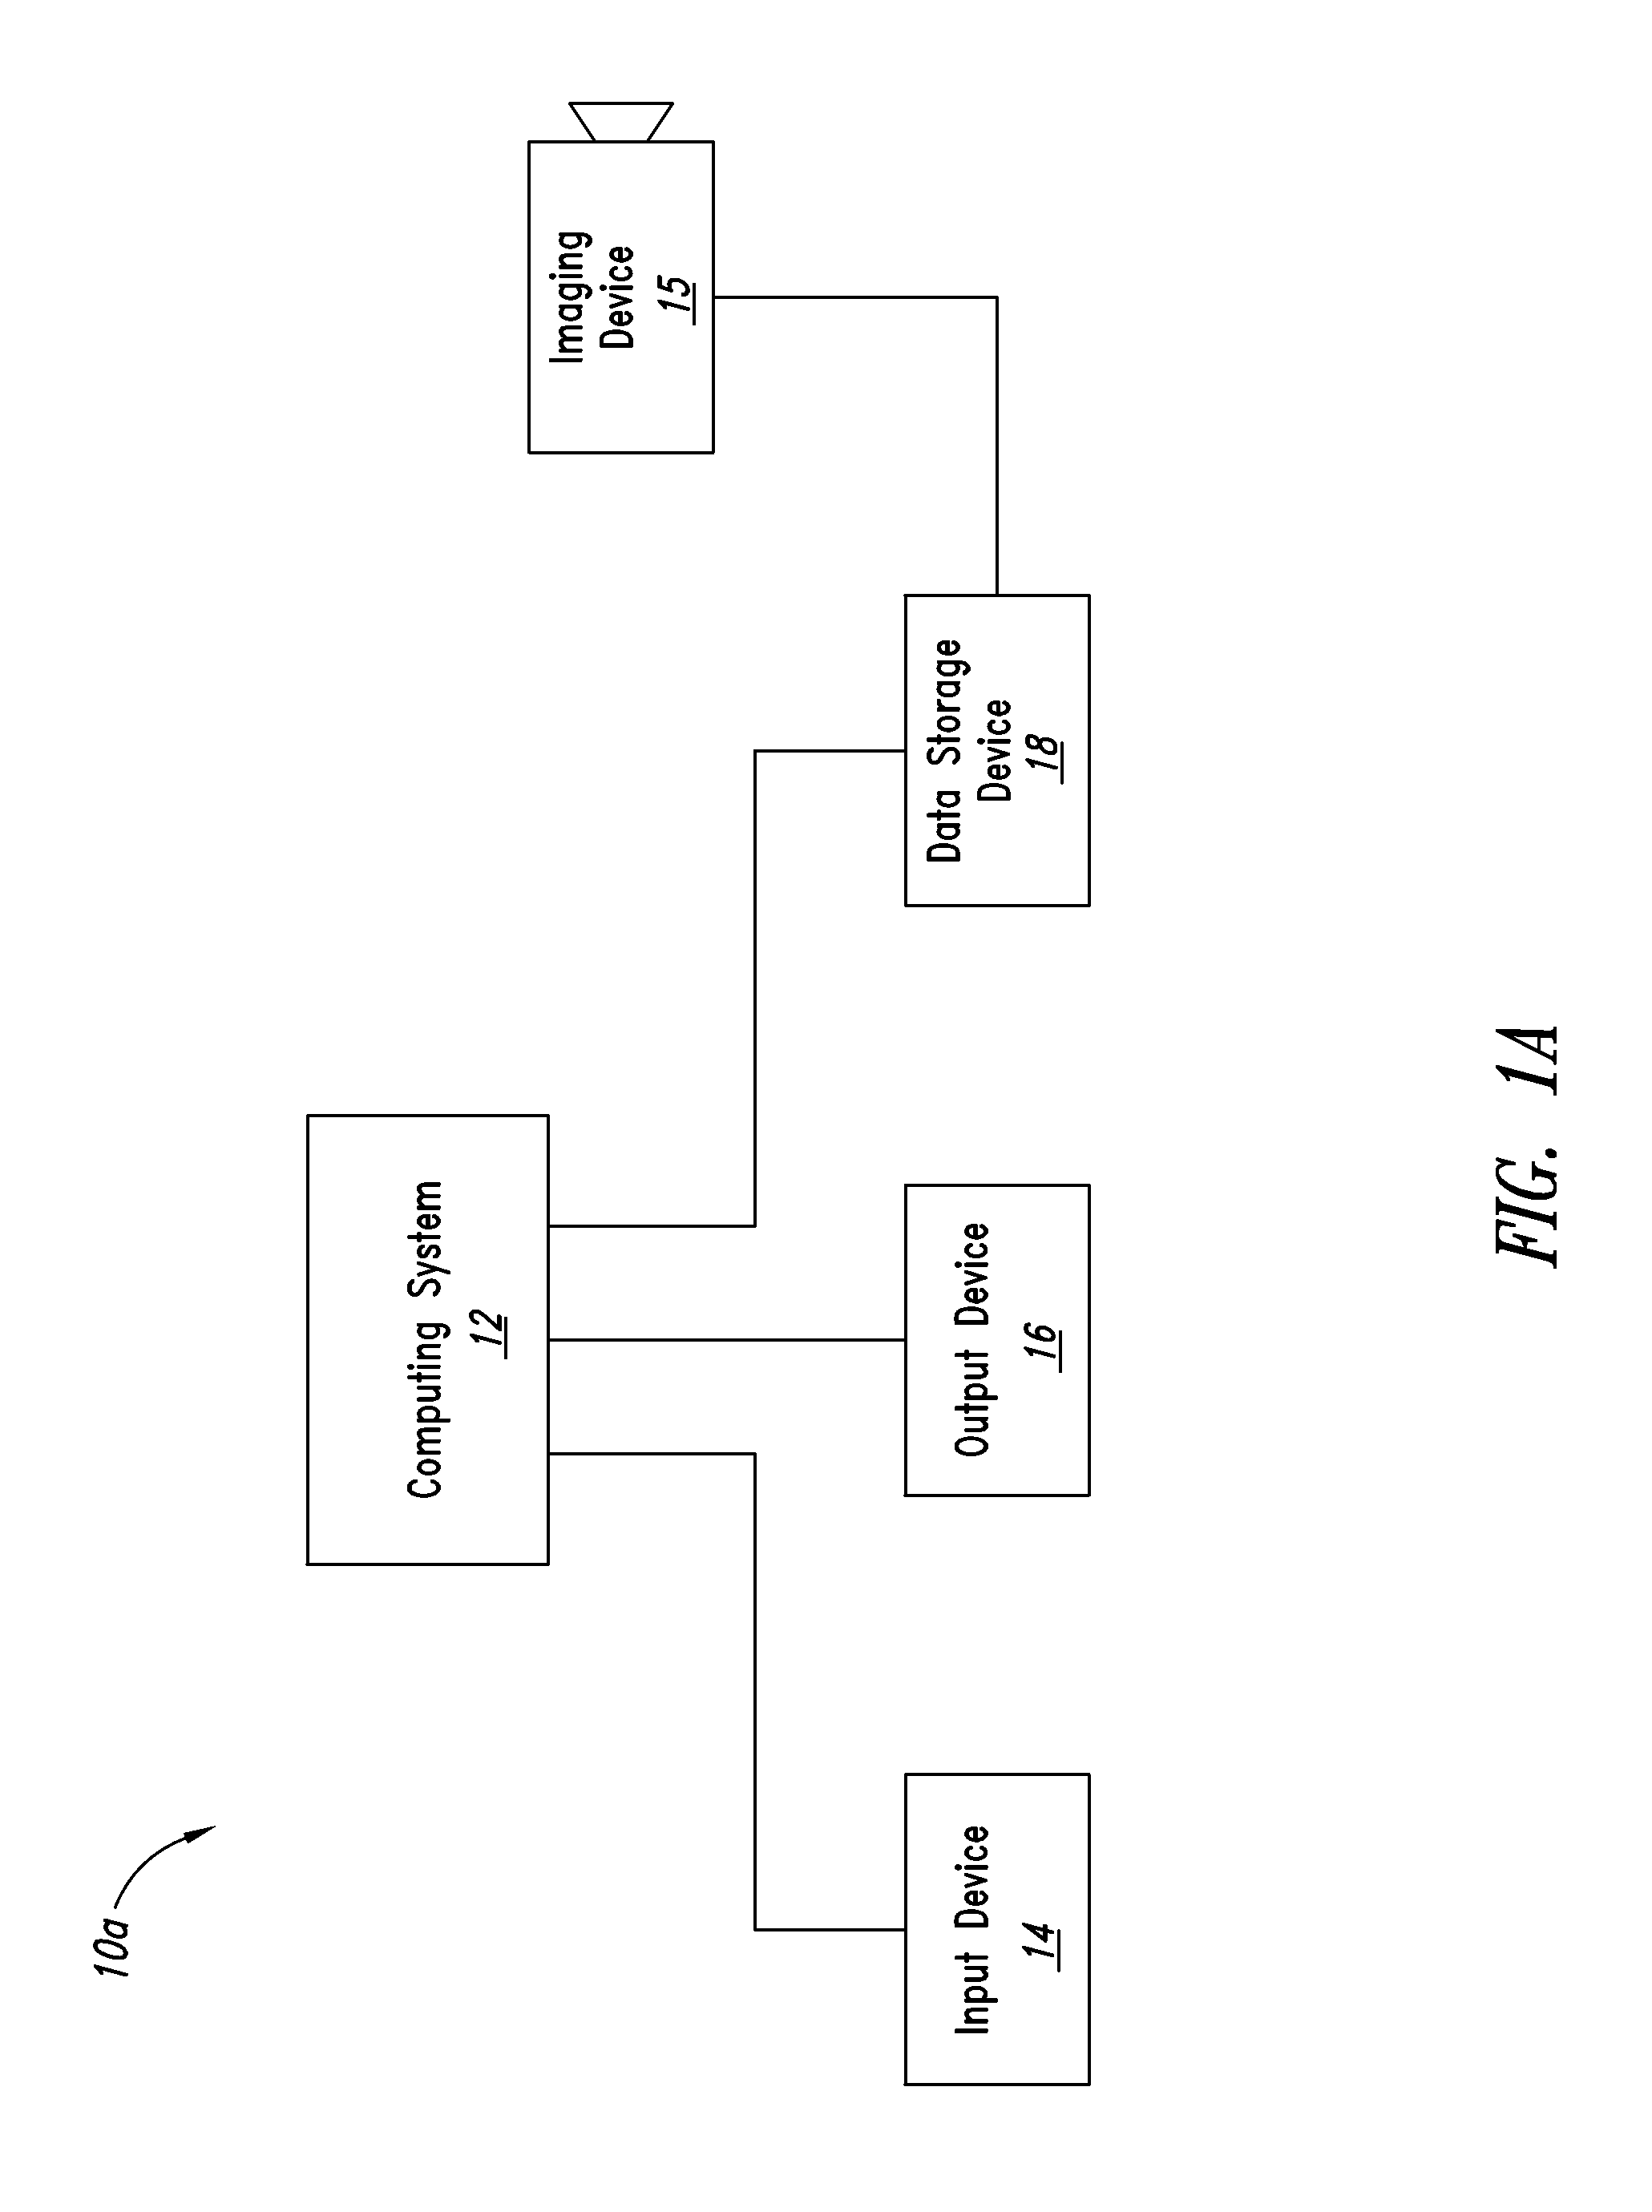 Semi-automatic dimensioning with imager on a portable device